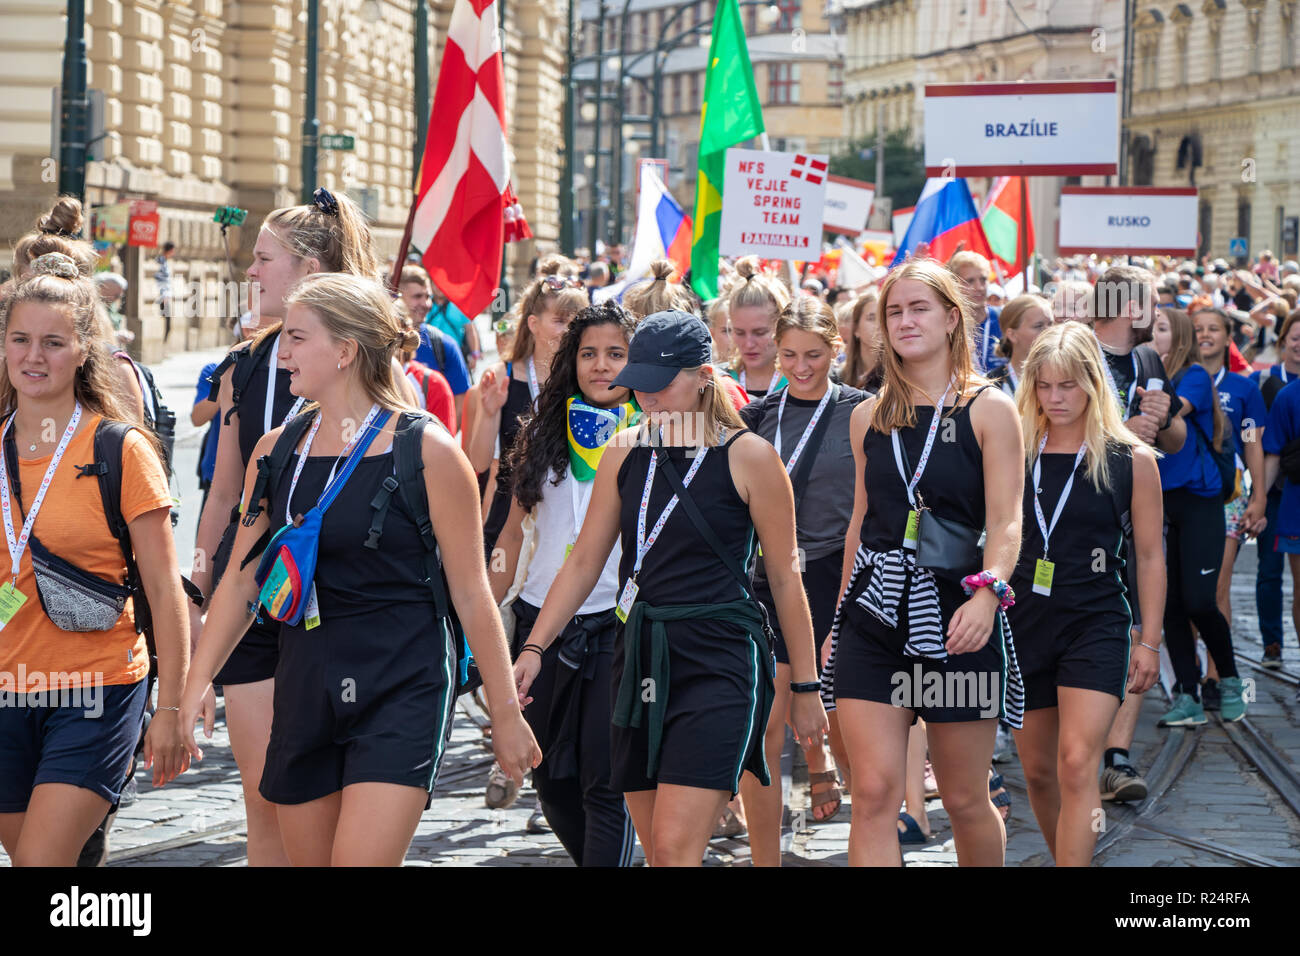 PRAGUE, CZECH REPUBLIC - JULY 1, 2018: International visitors parading at Sokolsky Slet, a once-every-six-years gathering of the Sokol movement - a Cz Stock Photo